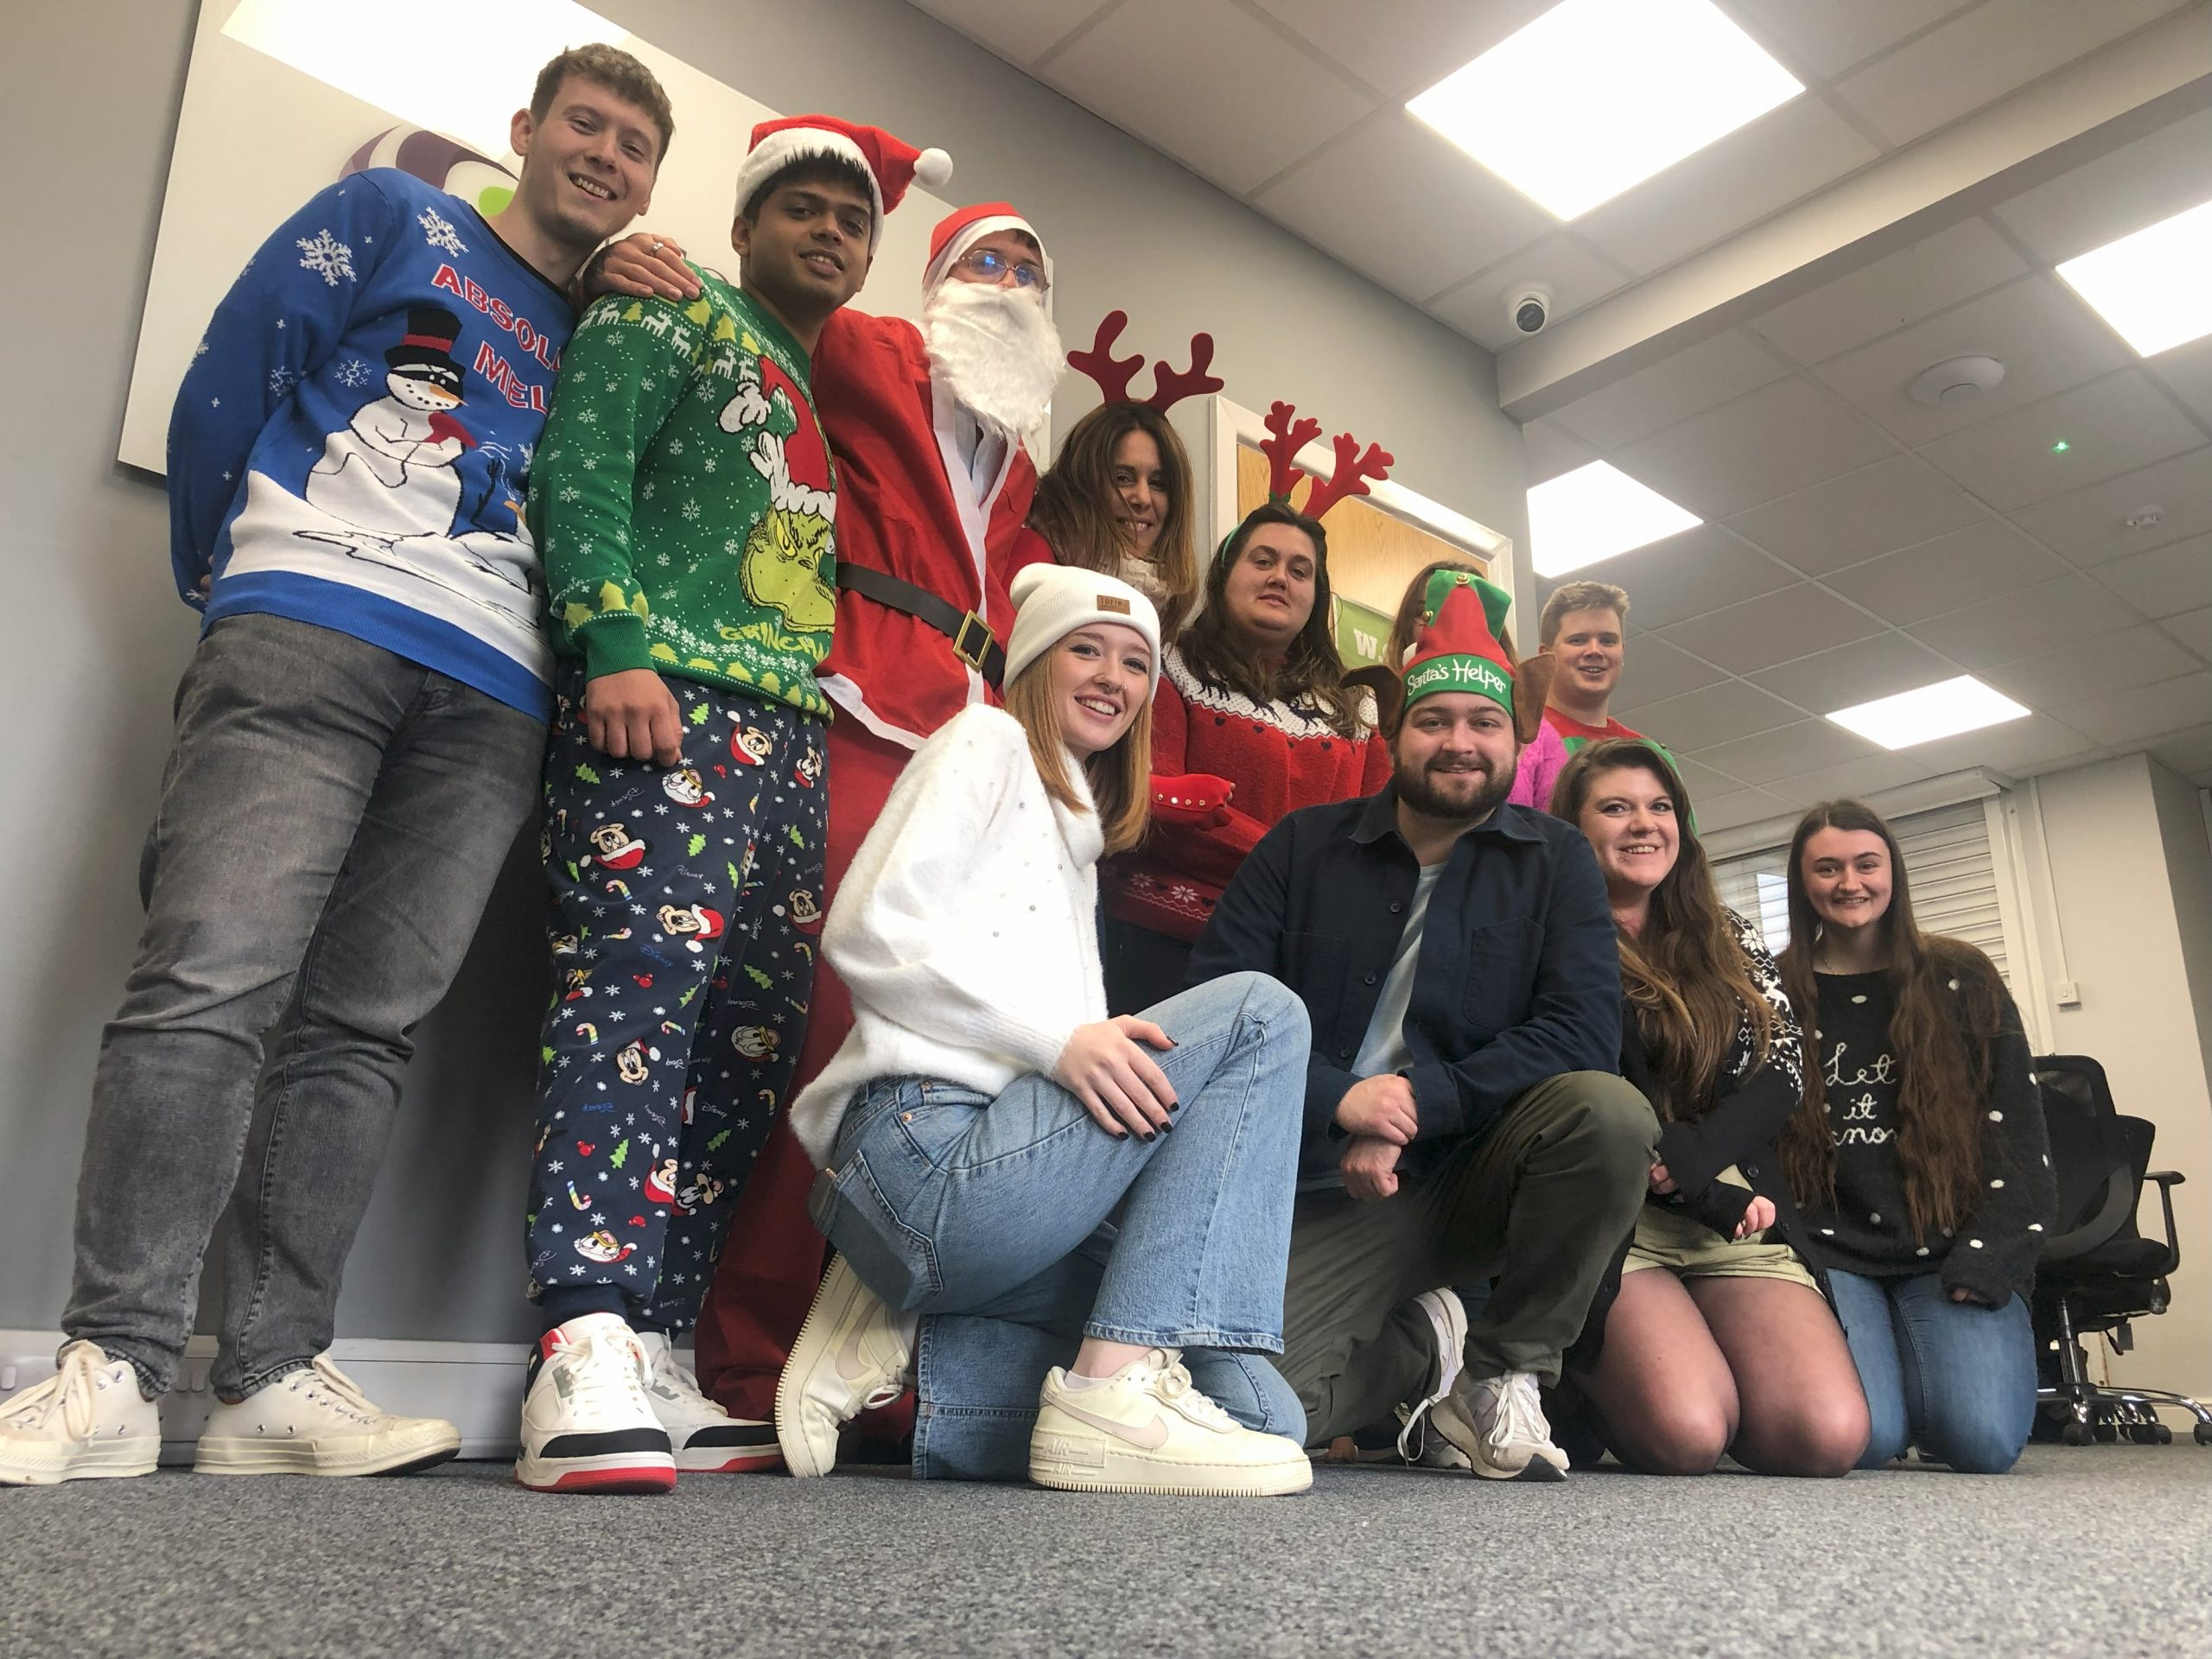 A group of people standing together smiling wearing Christmas jumpers and accessories.